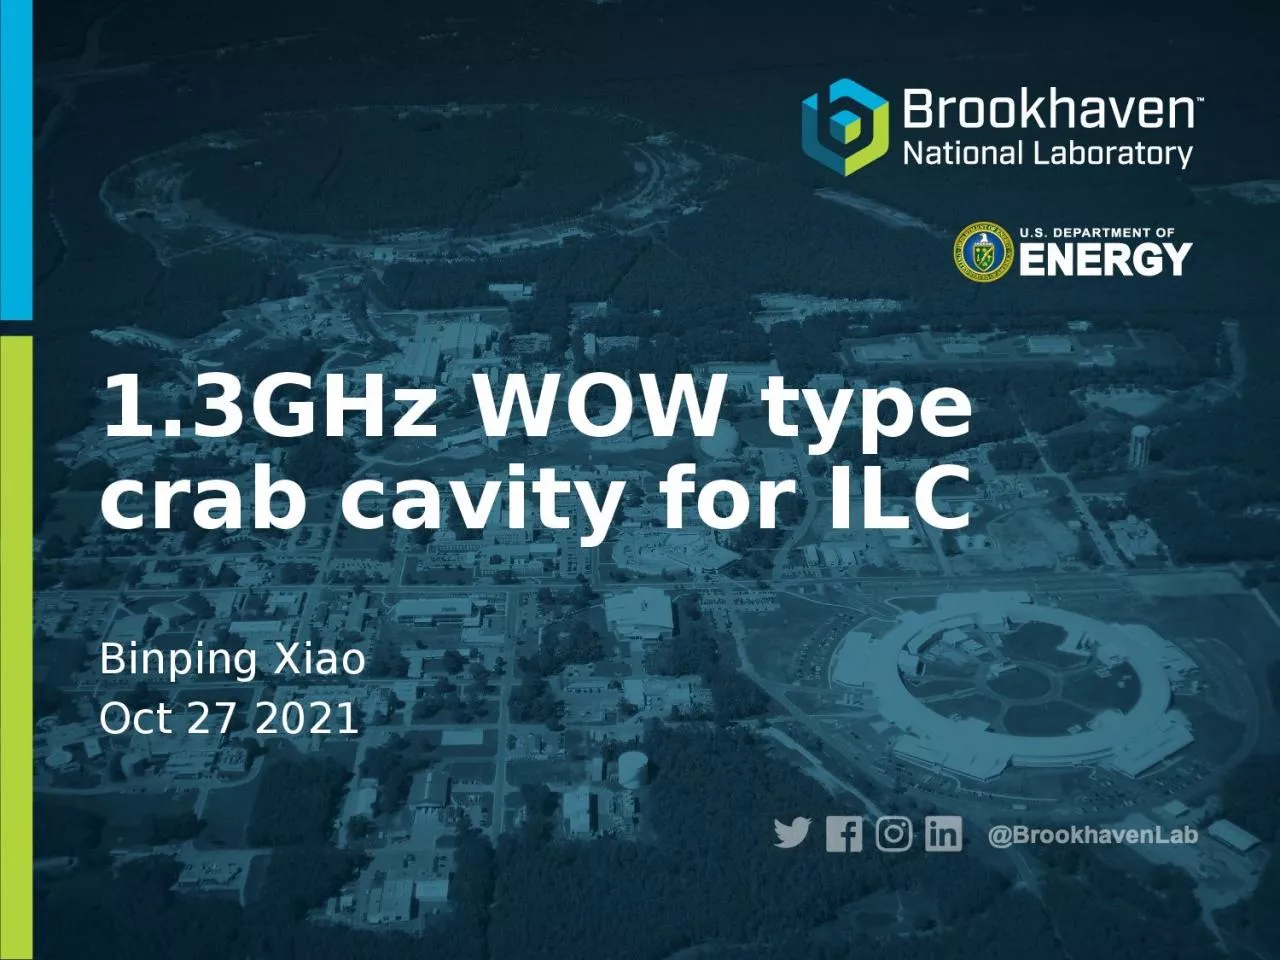 1.3GHz WOW type crab cavity for ILC